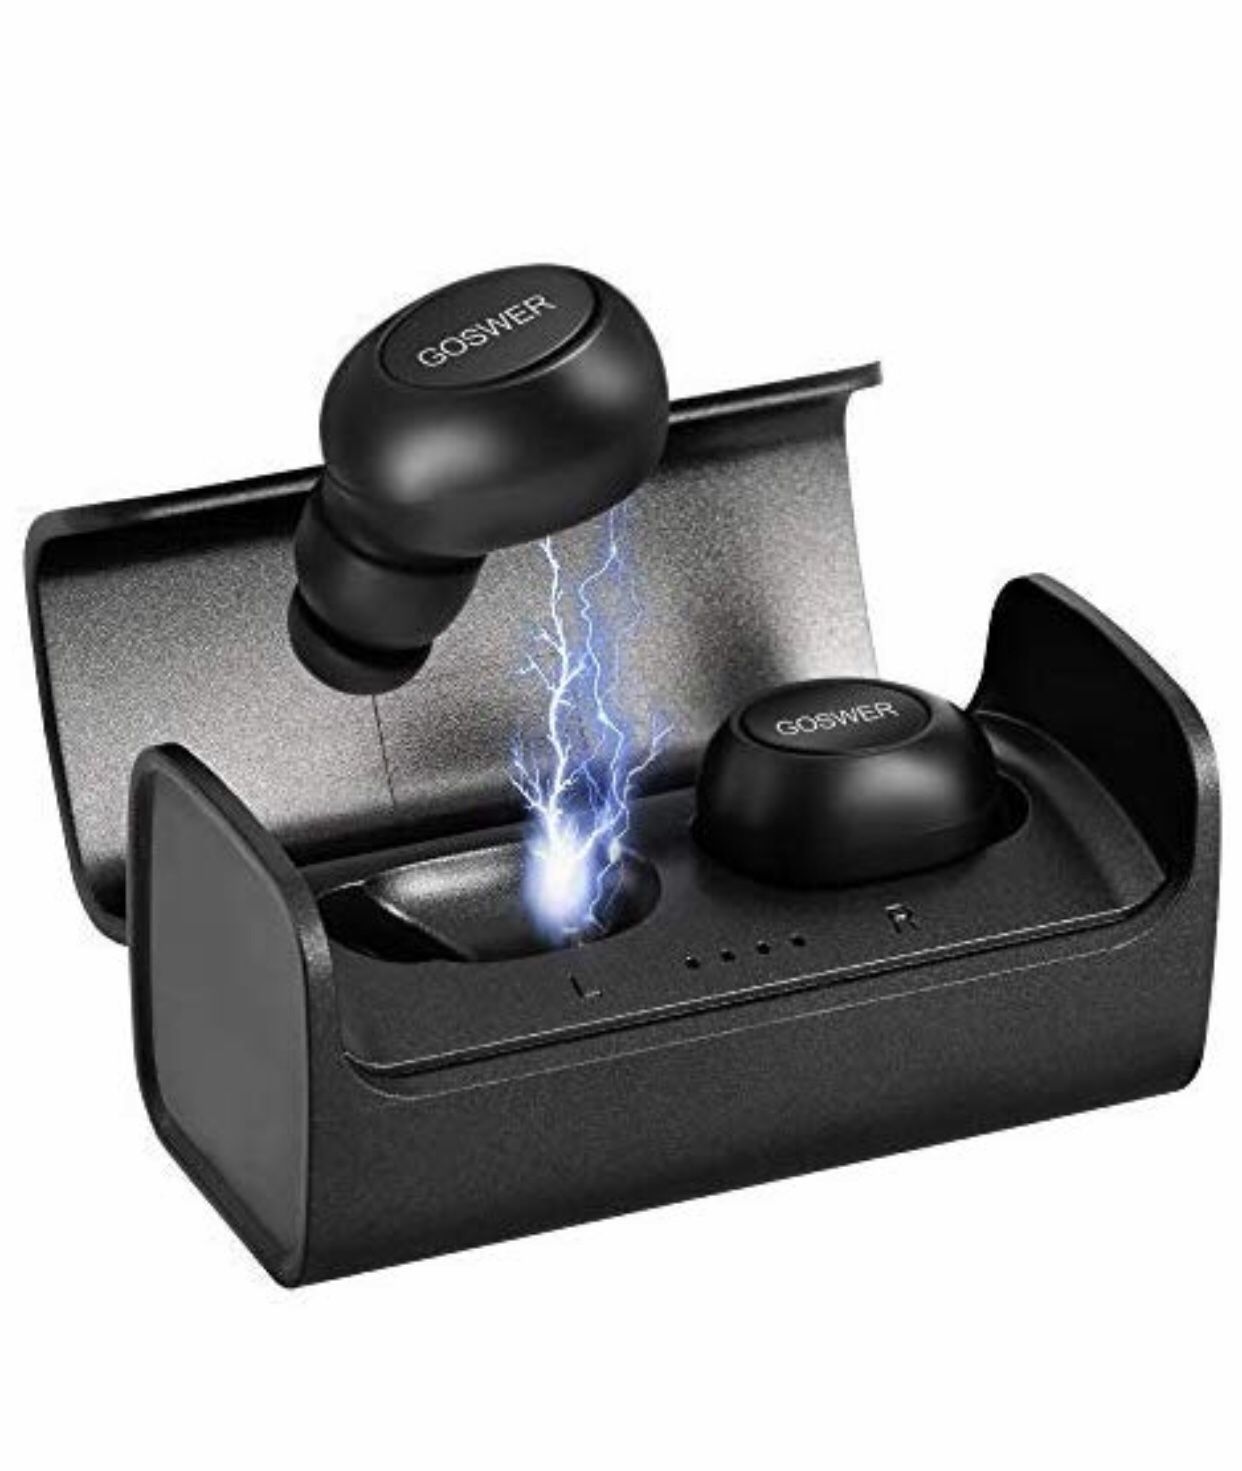 Wireless Earphones Goswer Bluetooth Headphone Mini Dual Earbuds Stereo Sound Waterproof Sport Earphones with Mic 400mAh portable Charging Box for iPh